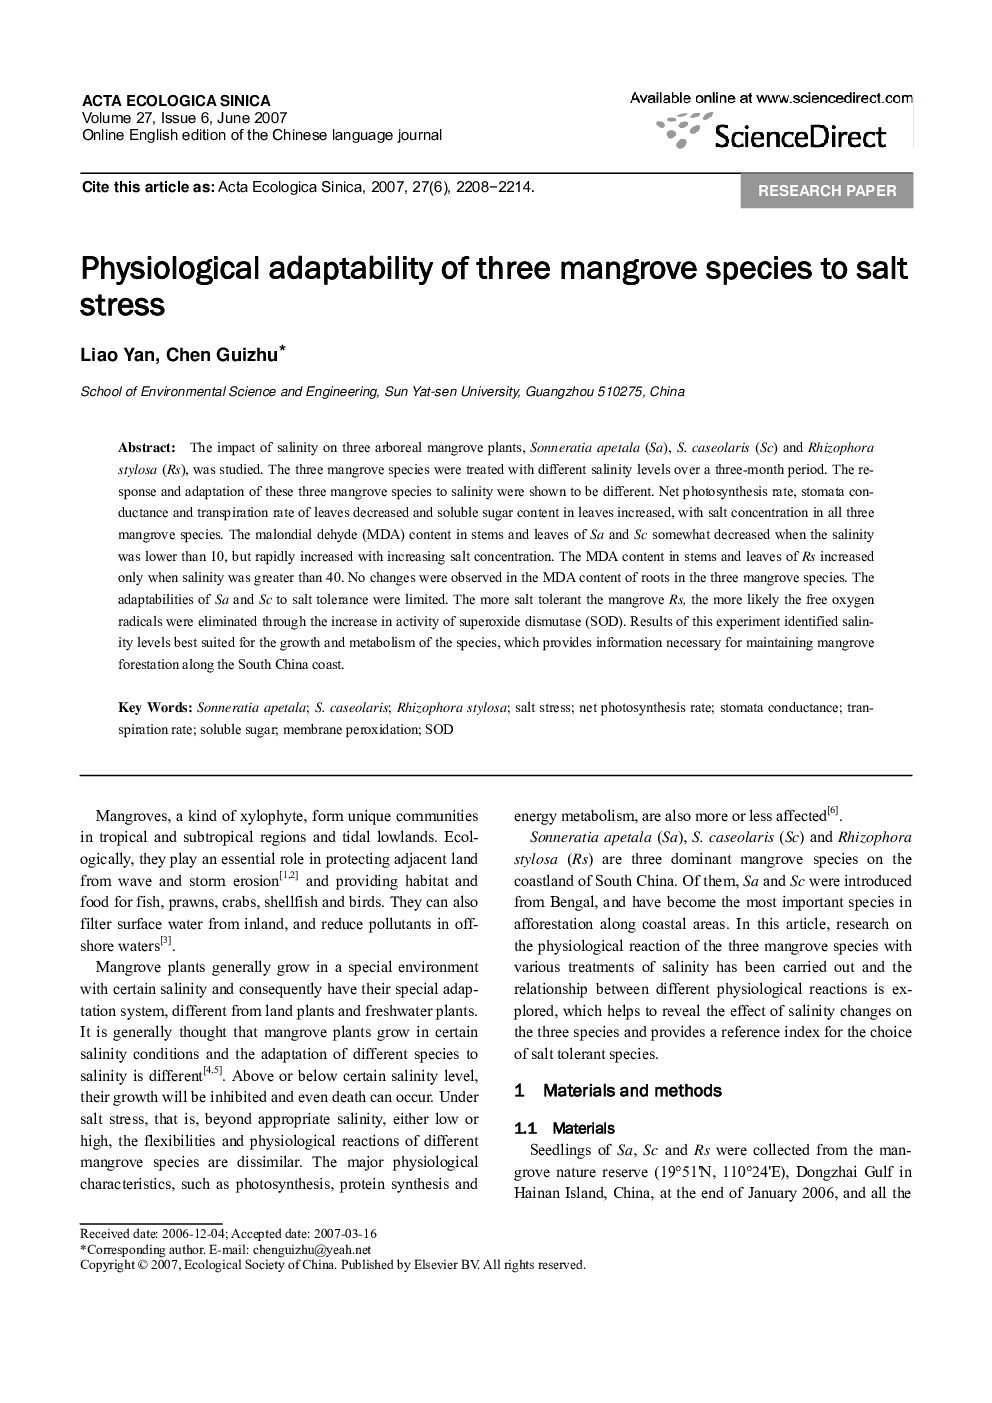 Physiological adaptability of three mangrove species to salt stress